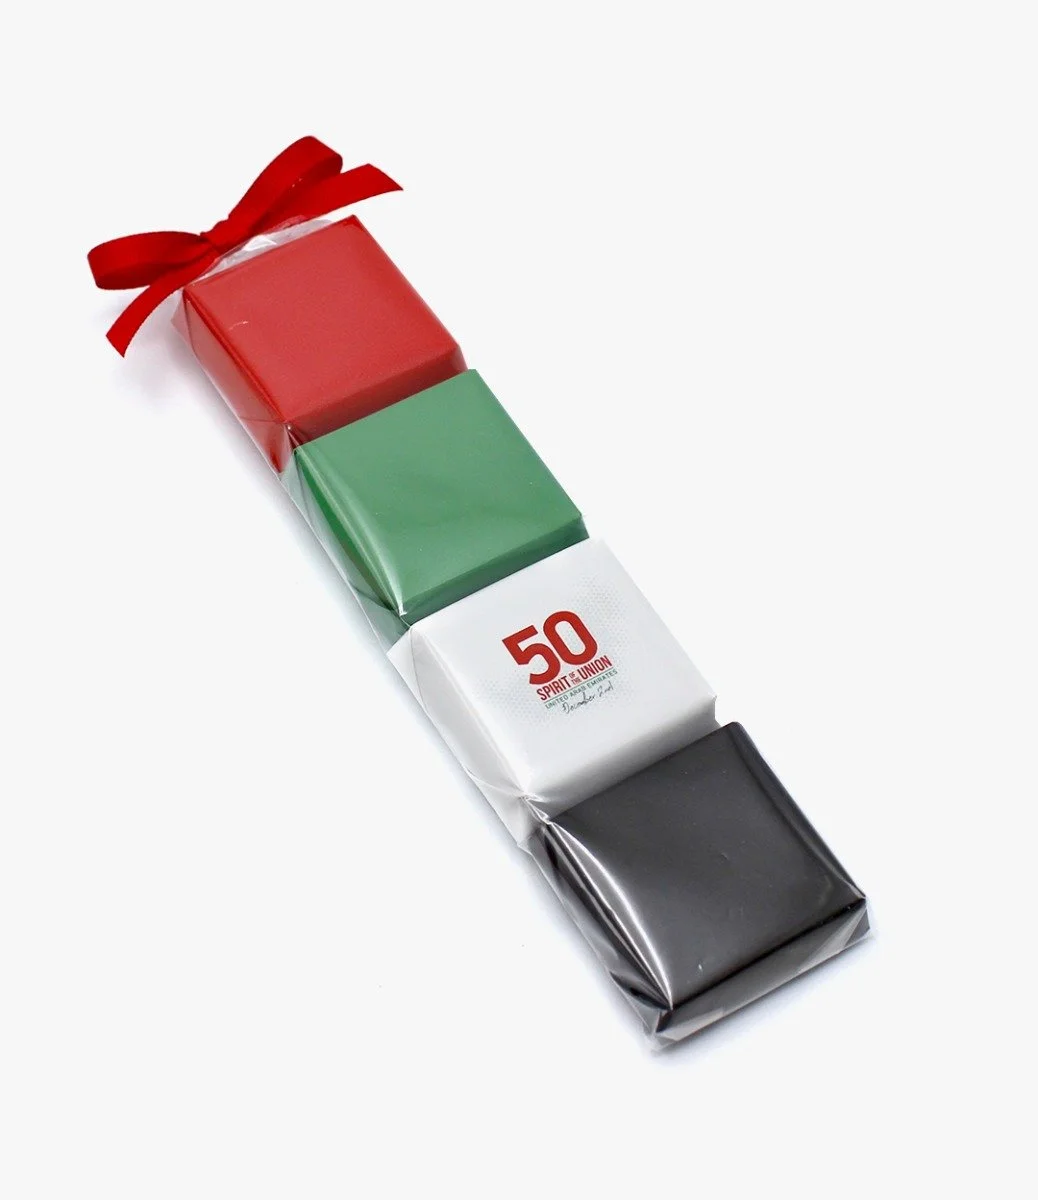 50 Years UAE with Bow - National Day Gift Box 80g - Pack of 10 Boxes By Le Chocolatier